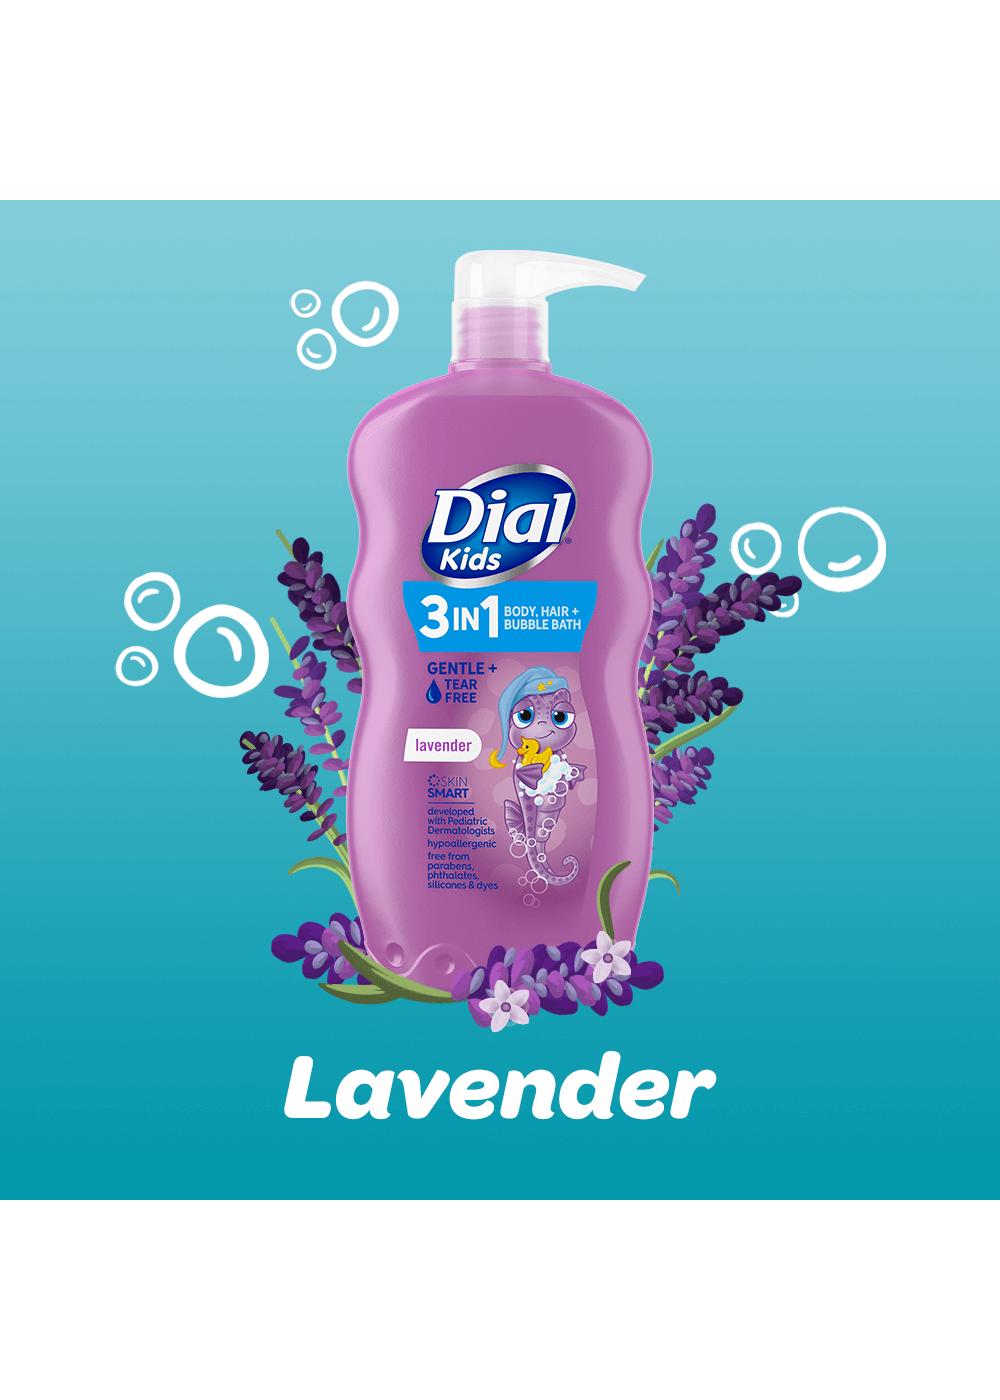 Dial Kids 3-in-1 Body + Hair + Bubble Bath - Lavender; image 2 of 8